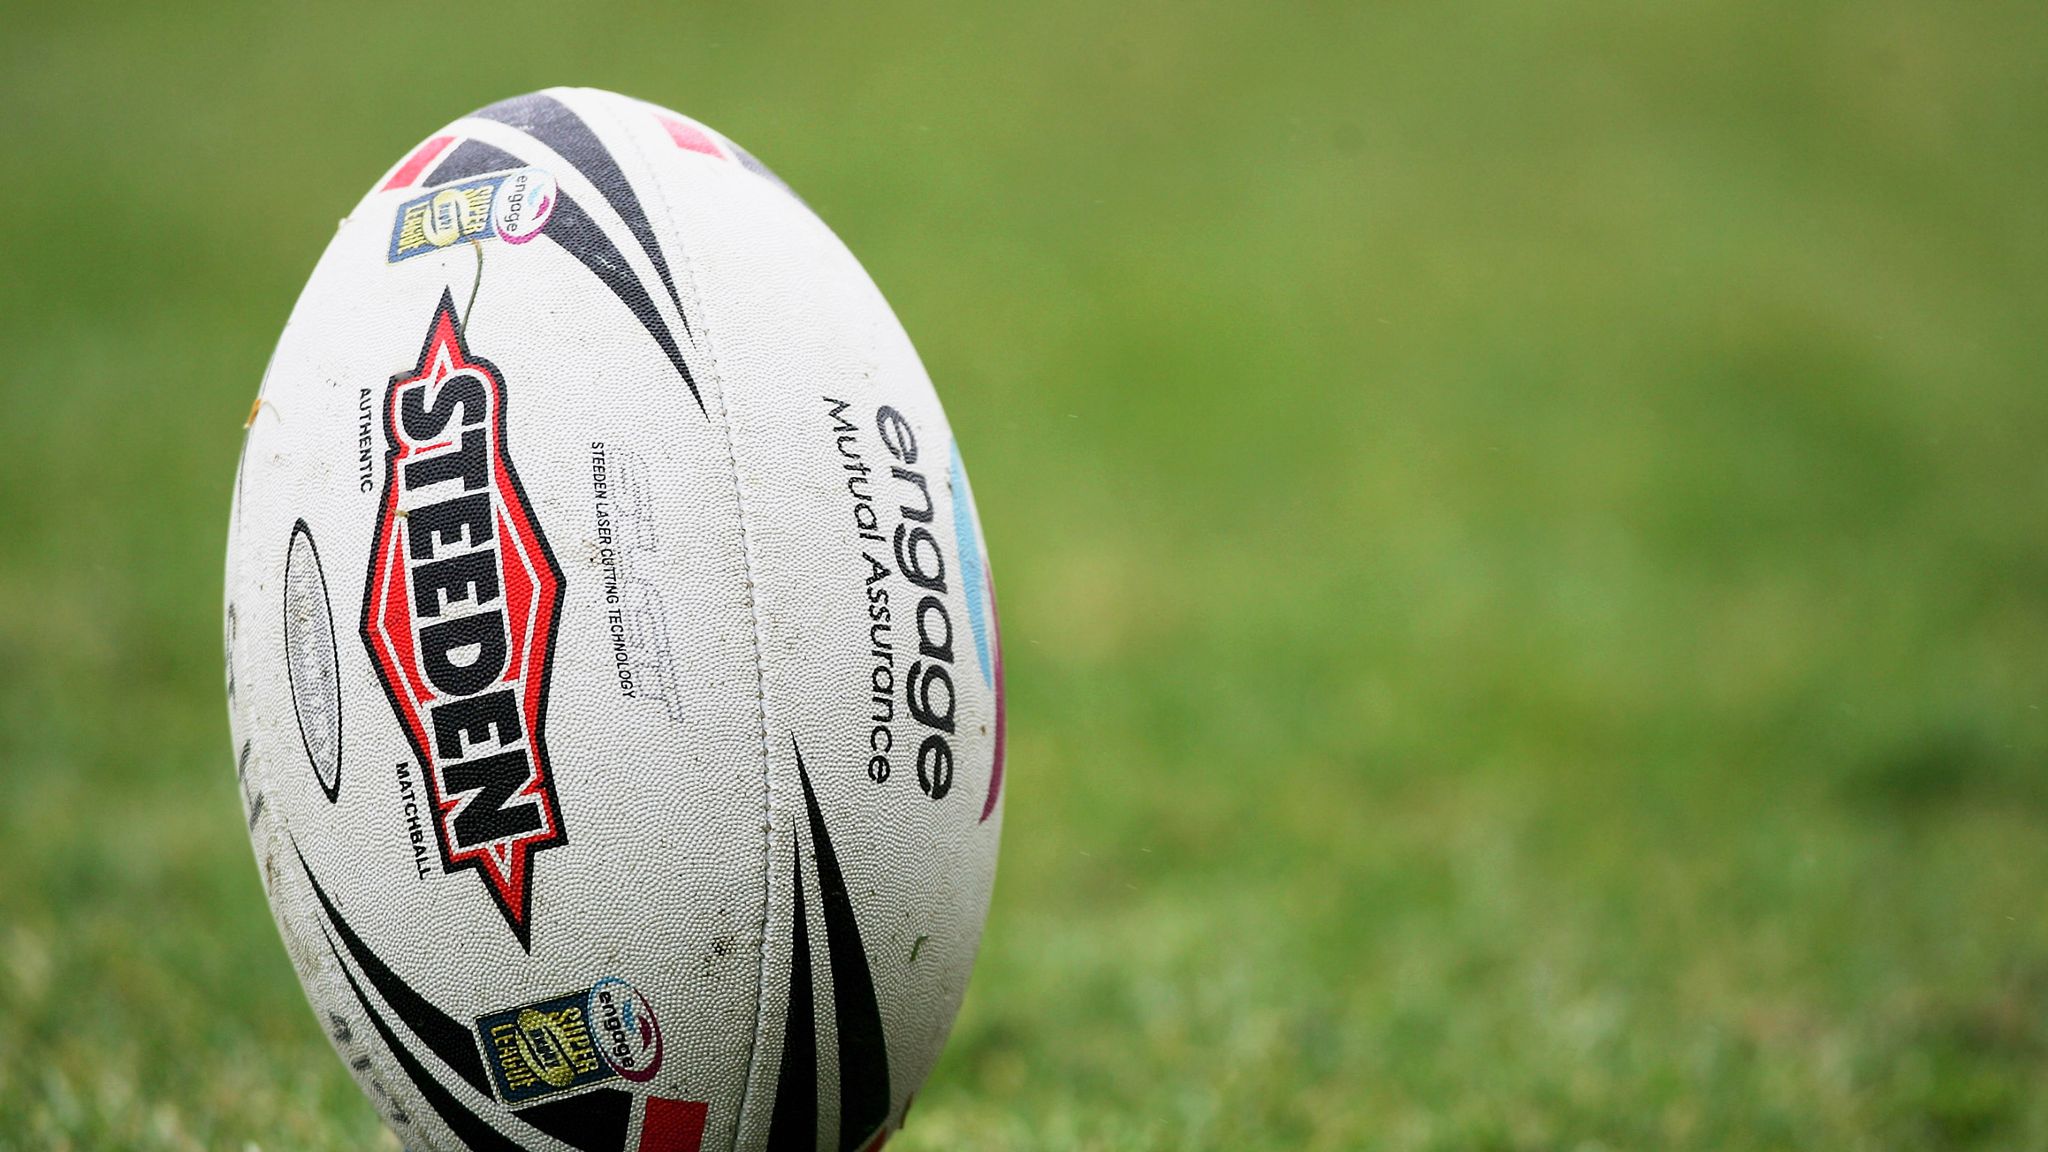 New York announce plans to create rugby league club Rugby League News Sky Sports